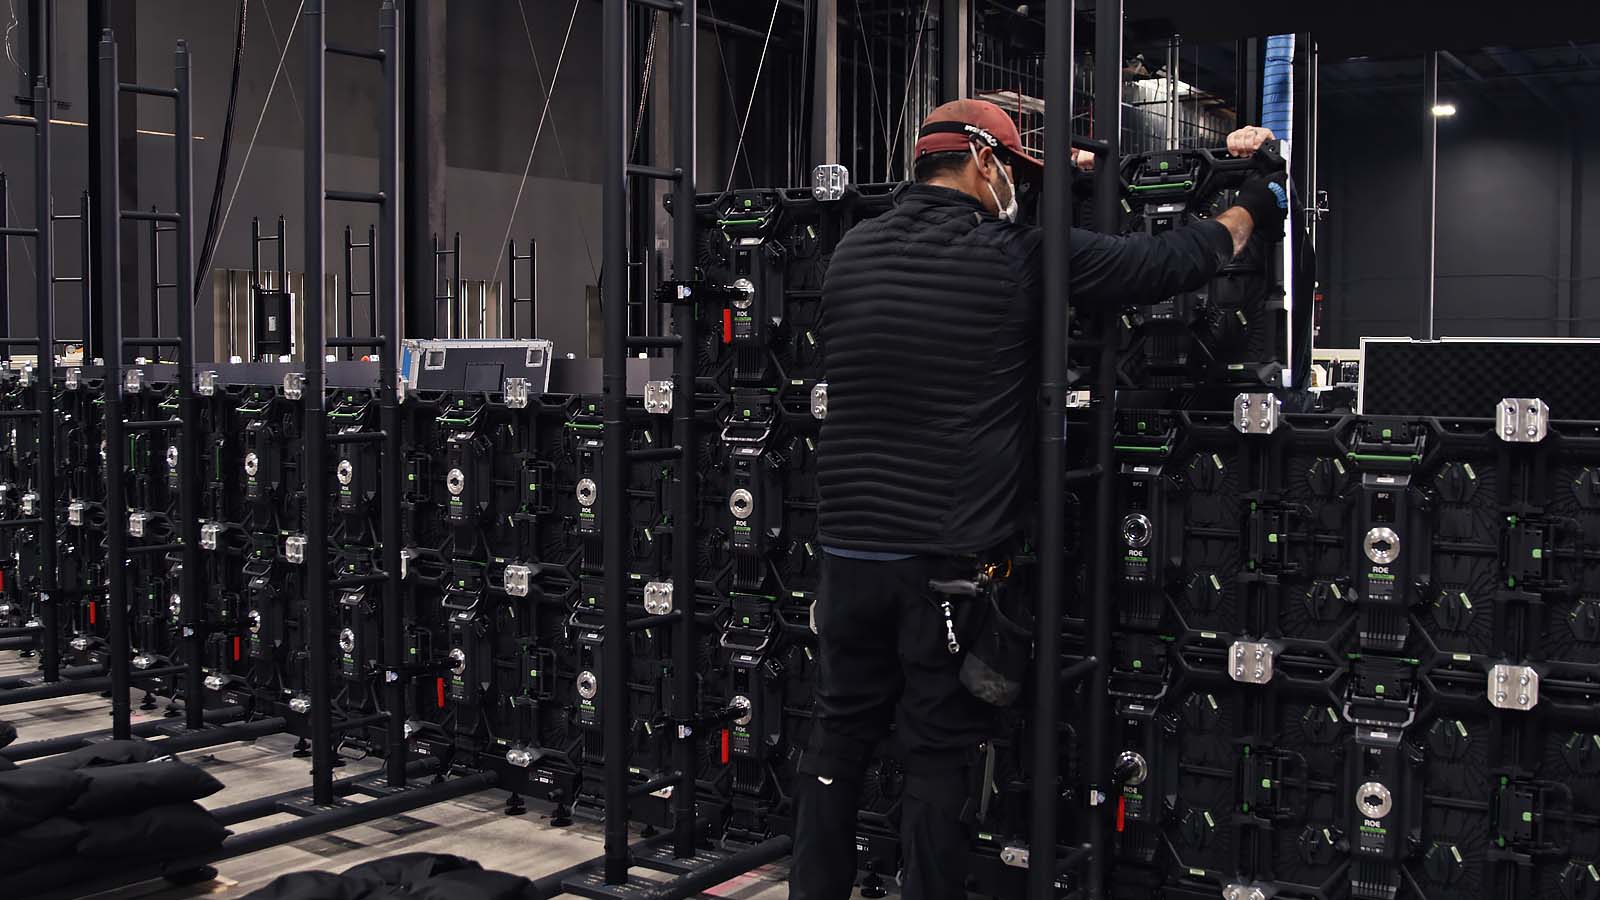 Constructing a huge LED volume wall. Image © Lux Machina